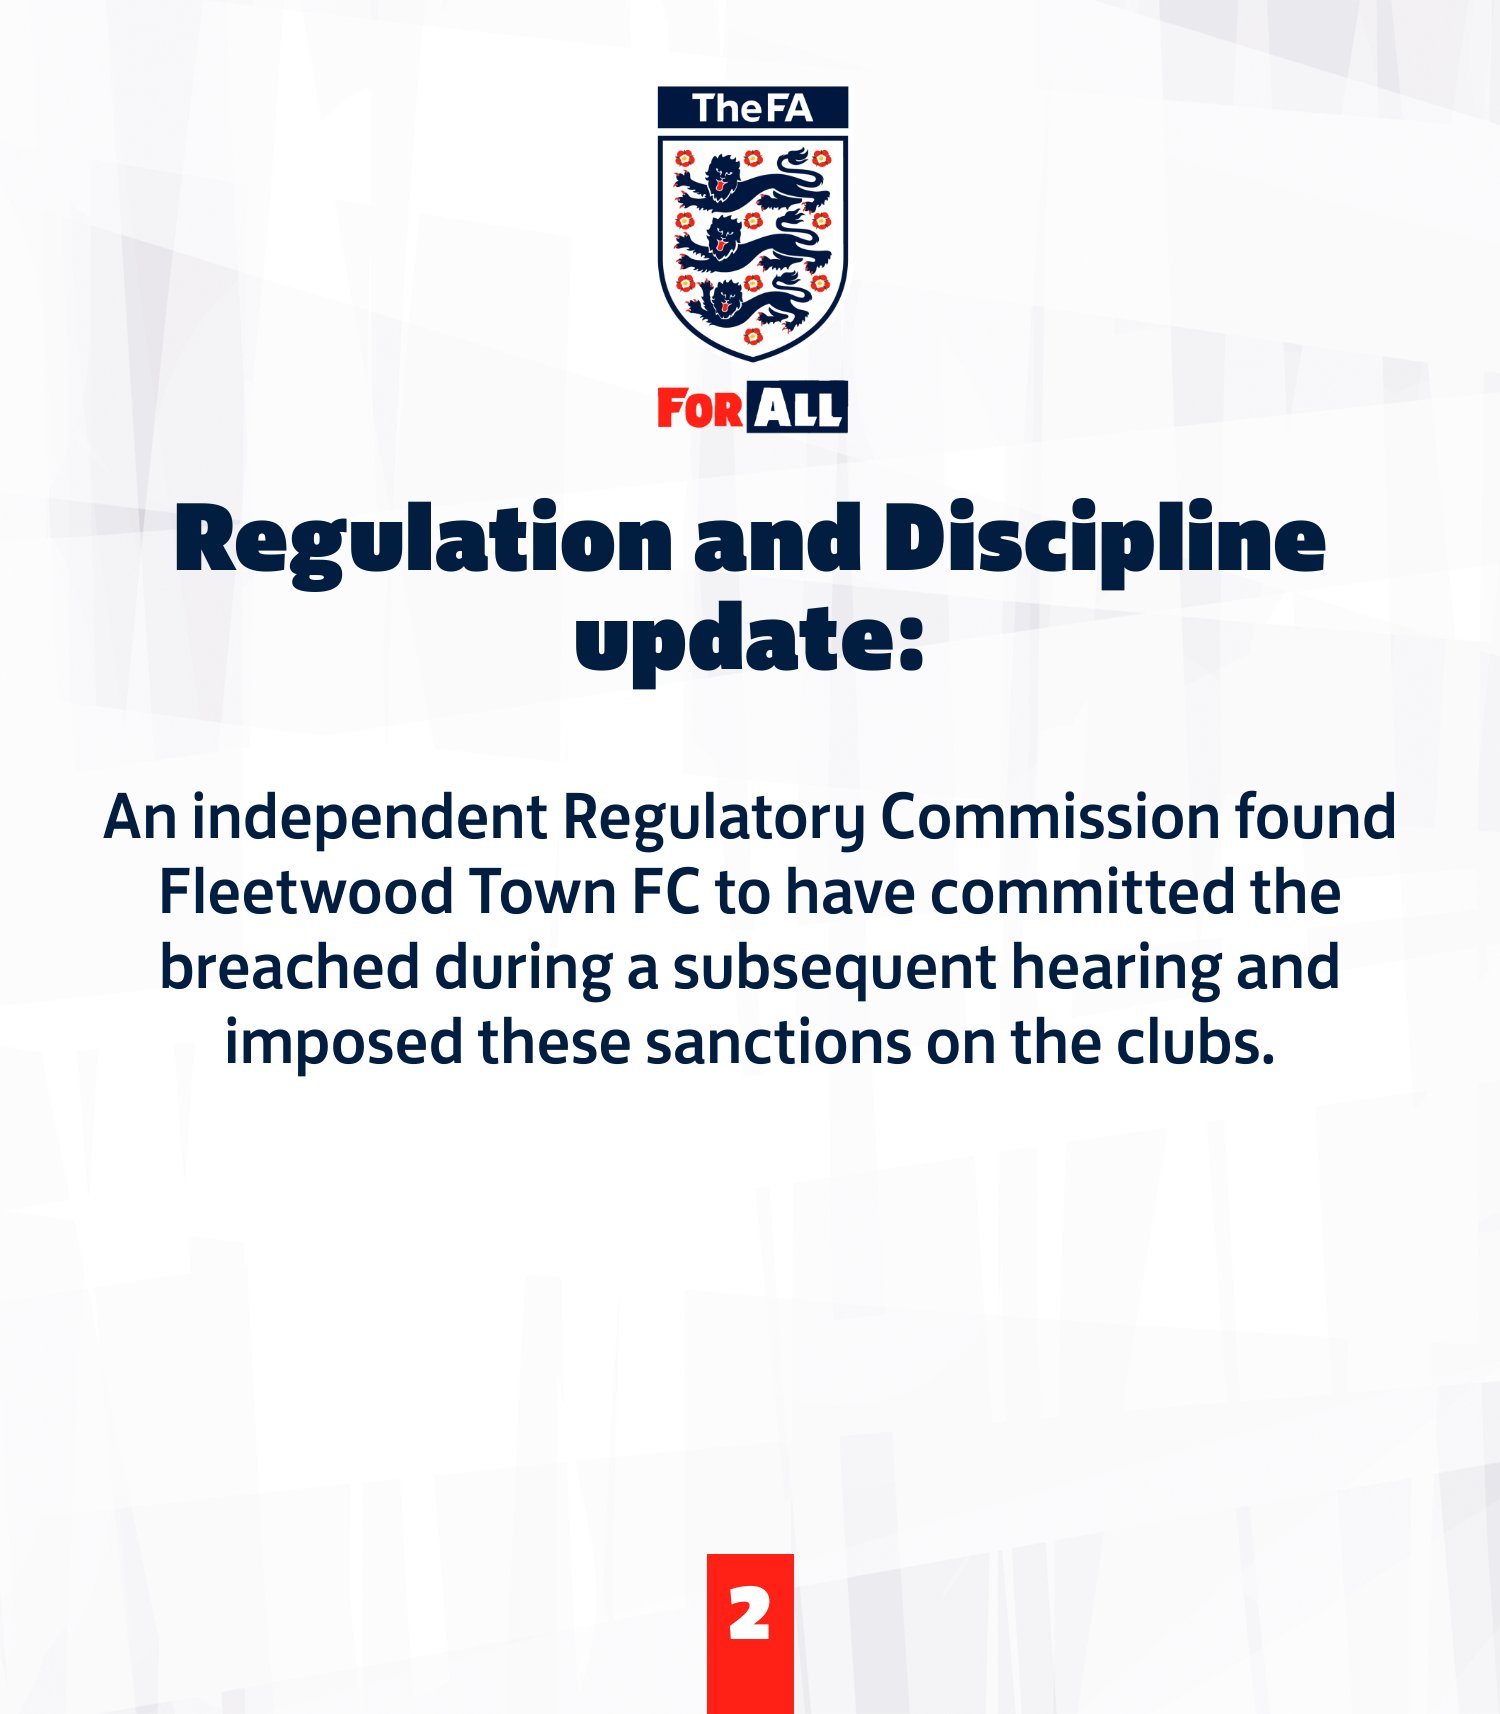 An independent Regulatory Commission found Fleetwood Town FC to have committed the breached during a subsequent hearing and imposed these sanctions on the clubs.